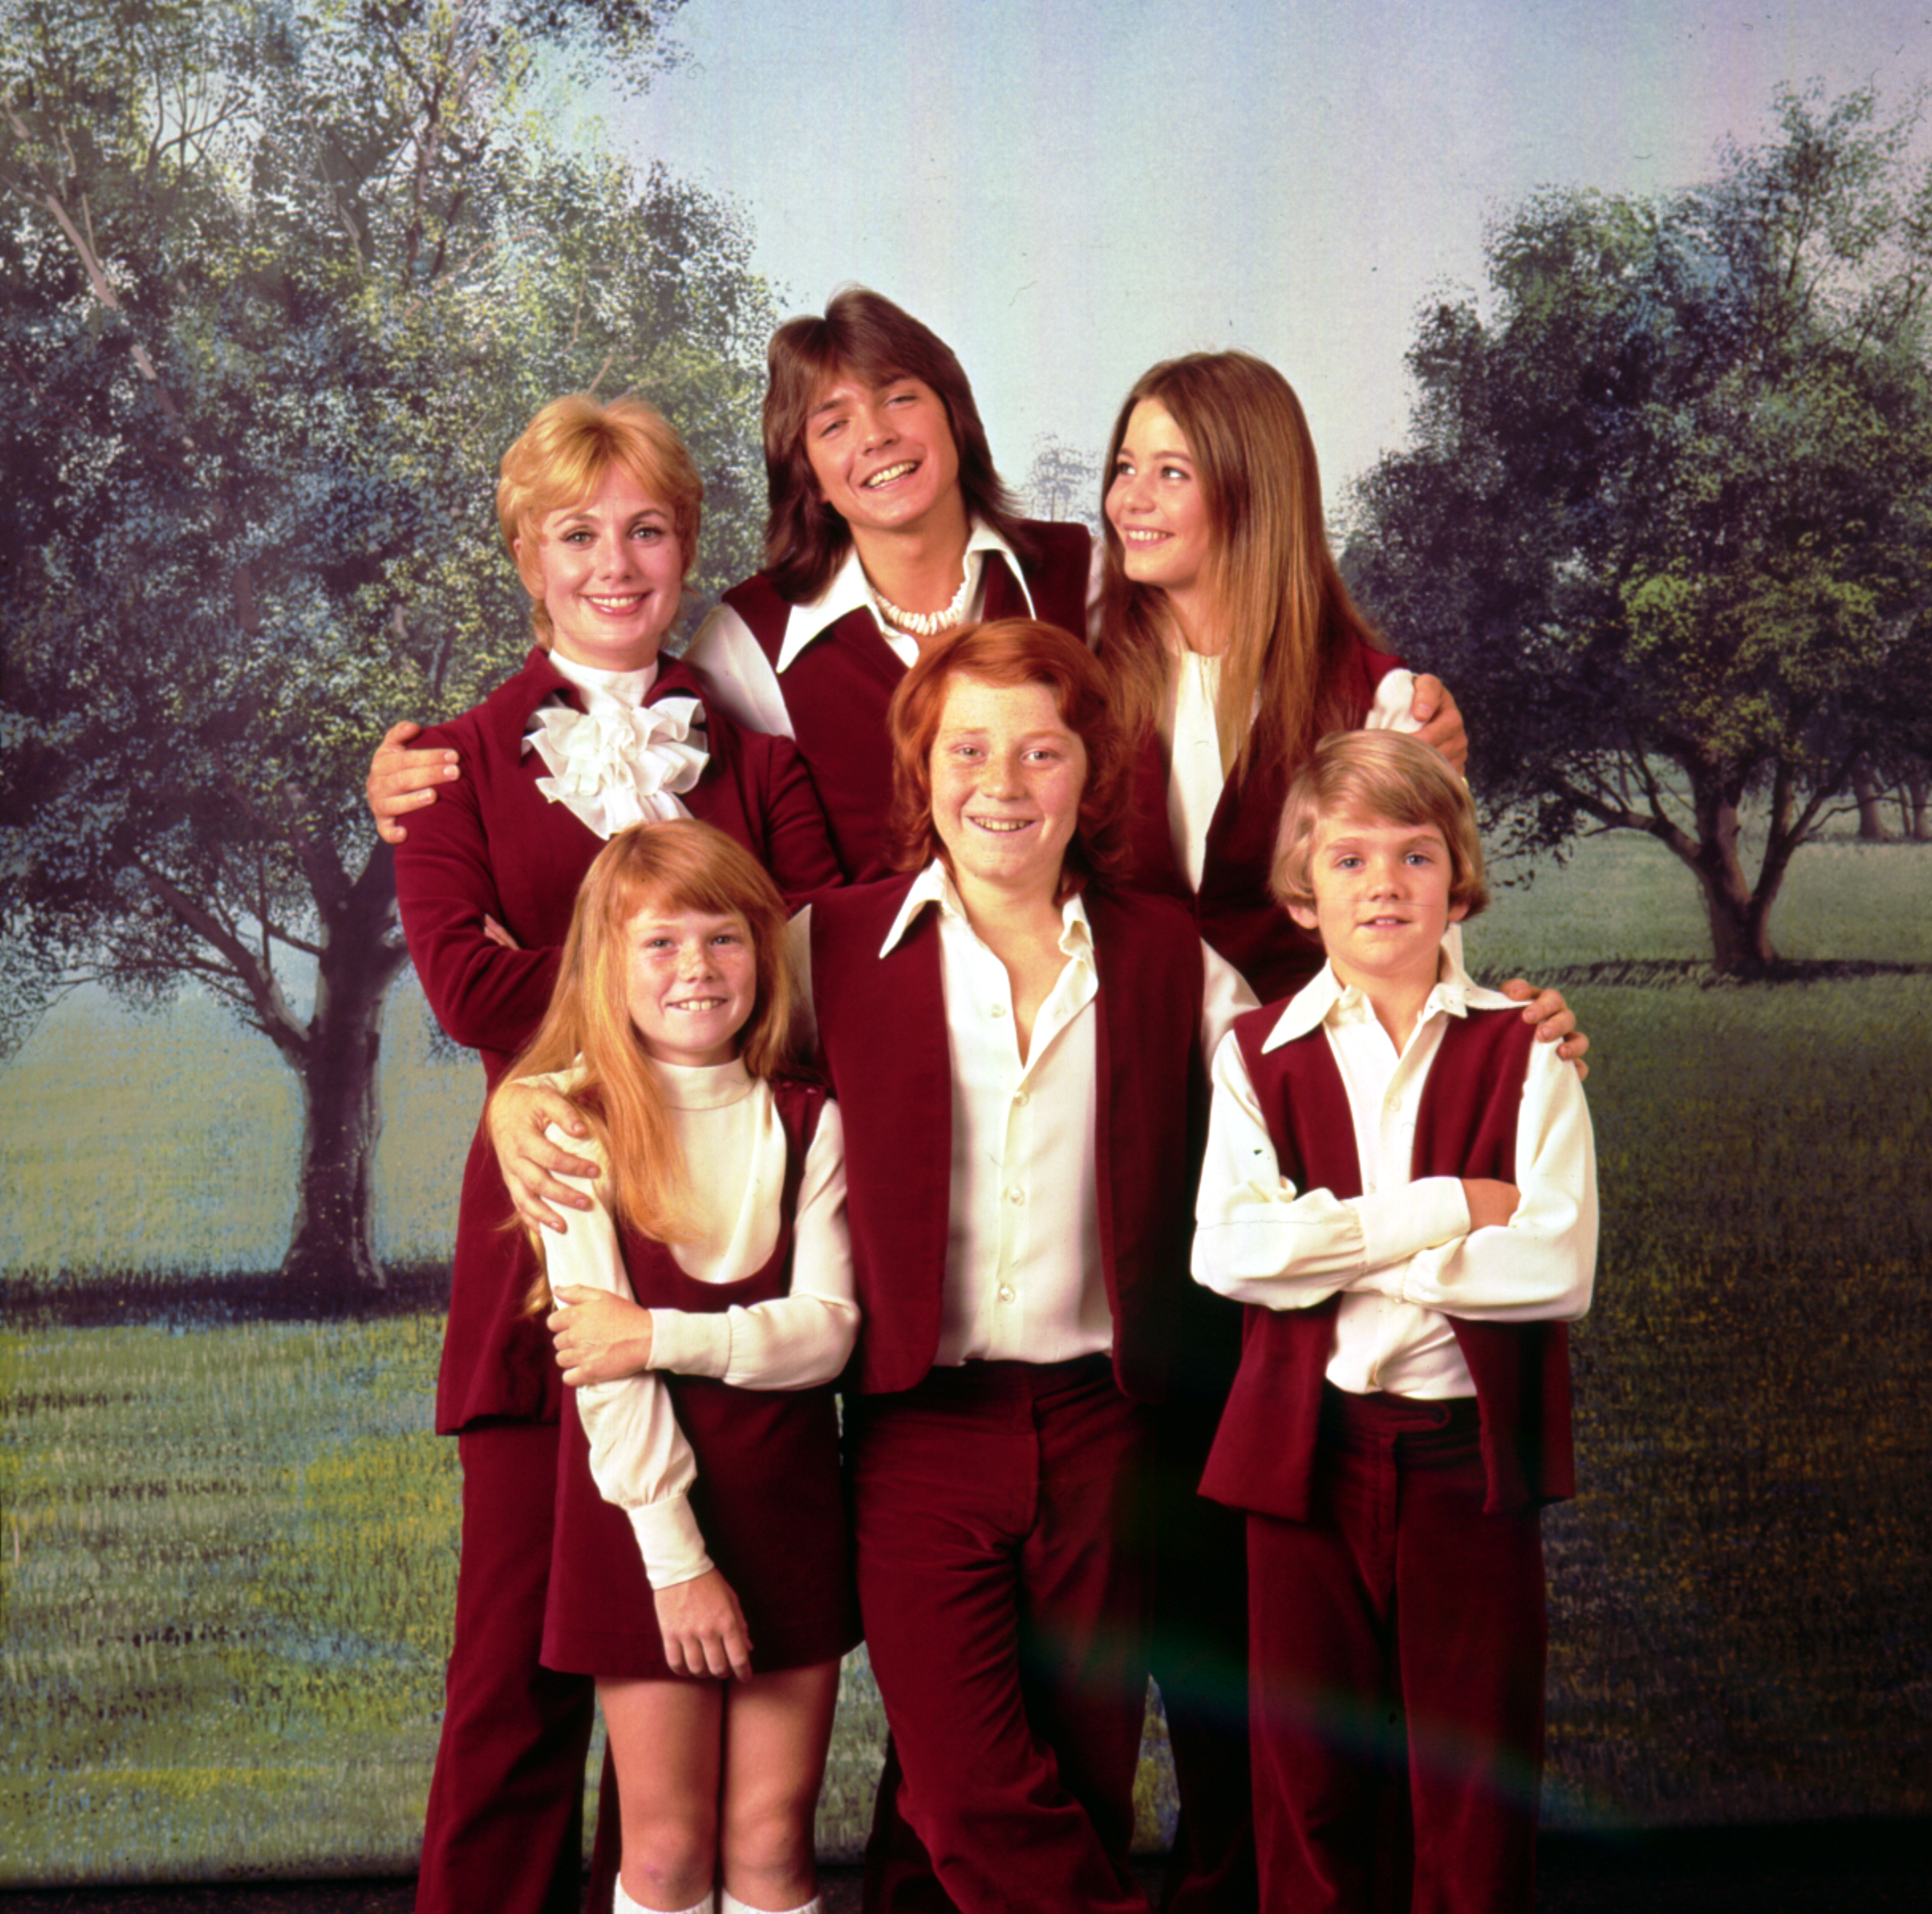  "The Partridge Family" cast photographed in 1970 | Source: Getty Images